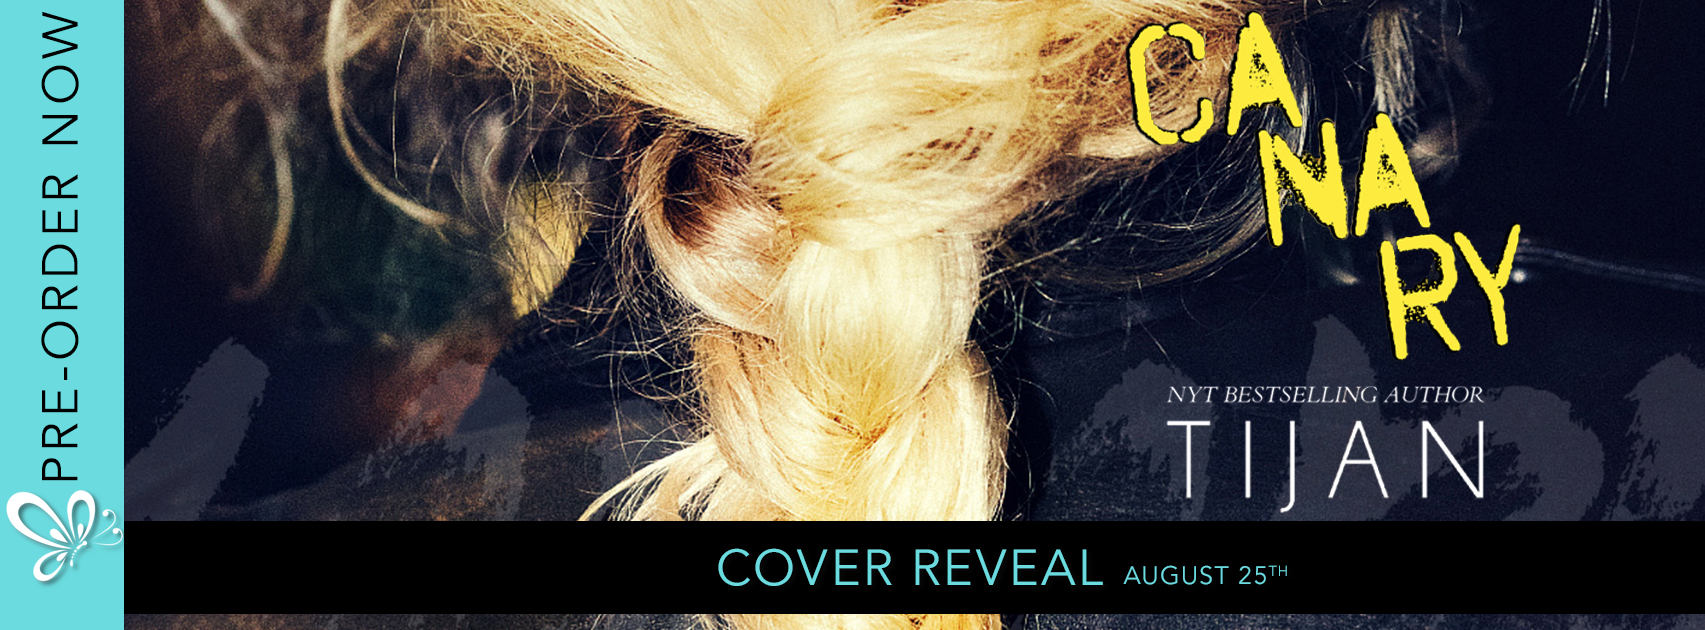 COVER REVEAL: Canary by Tijan